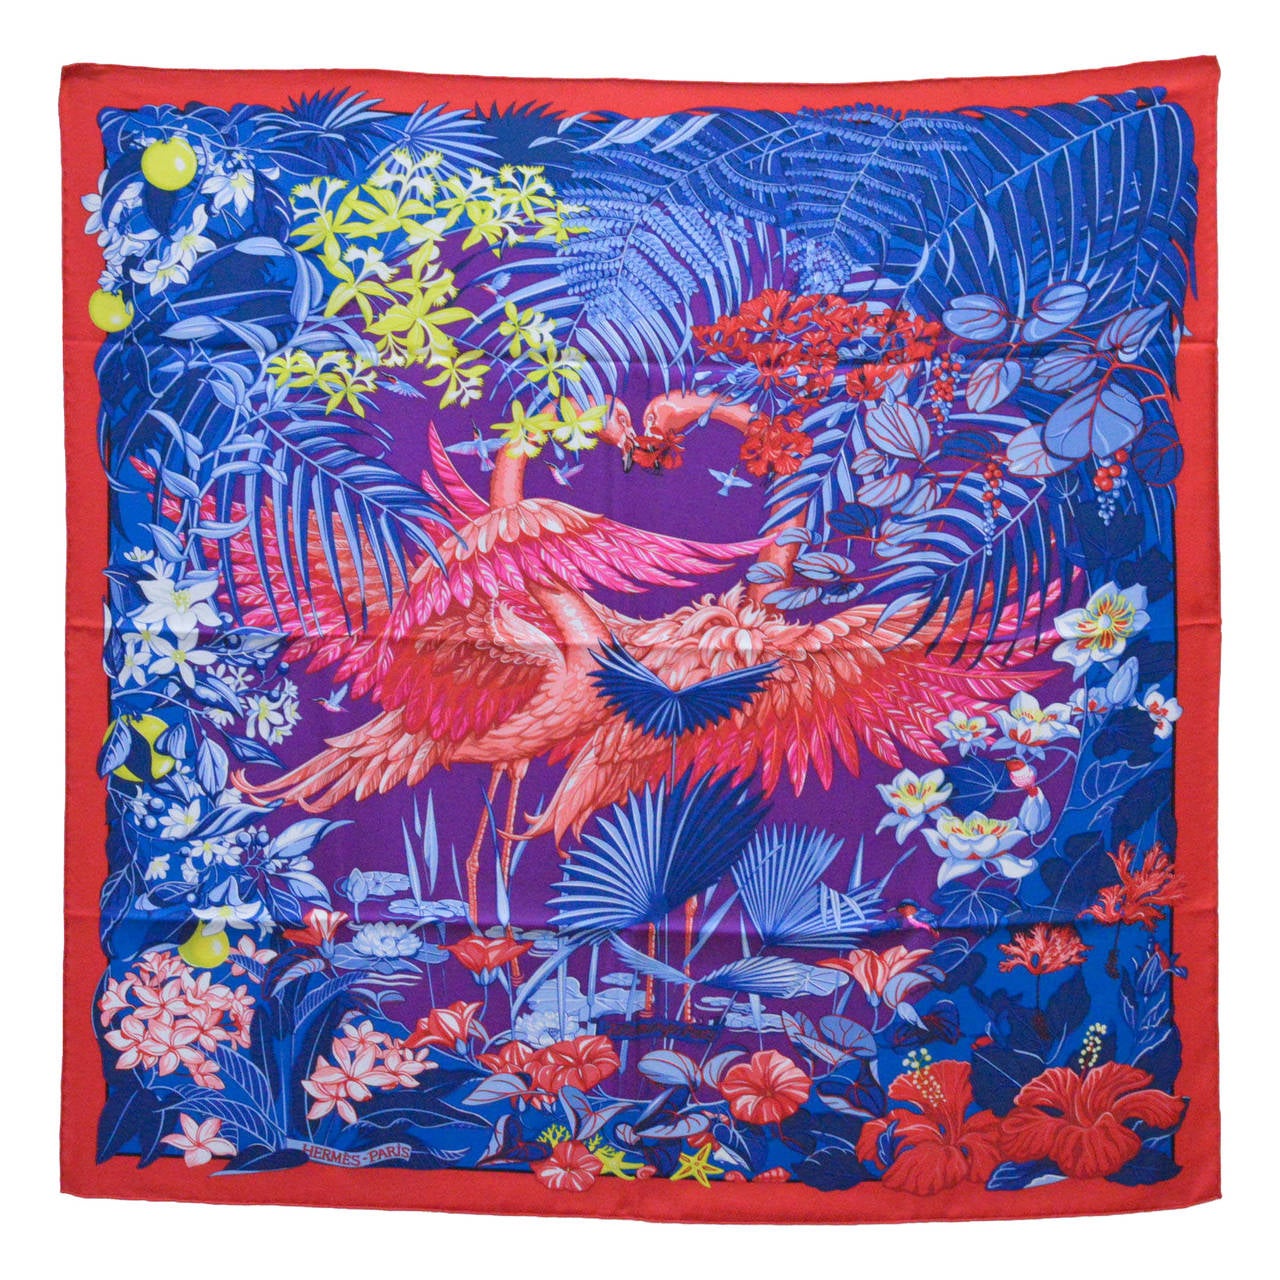 HERMES Carre Twill FLAMINGO PARTY Silk RED, PURPLE 2015.